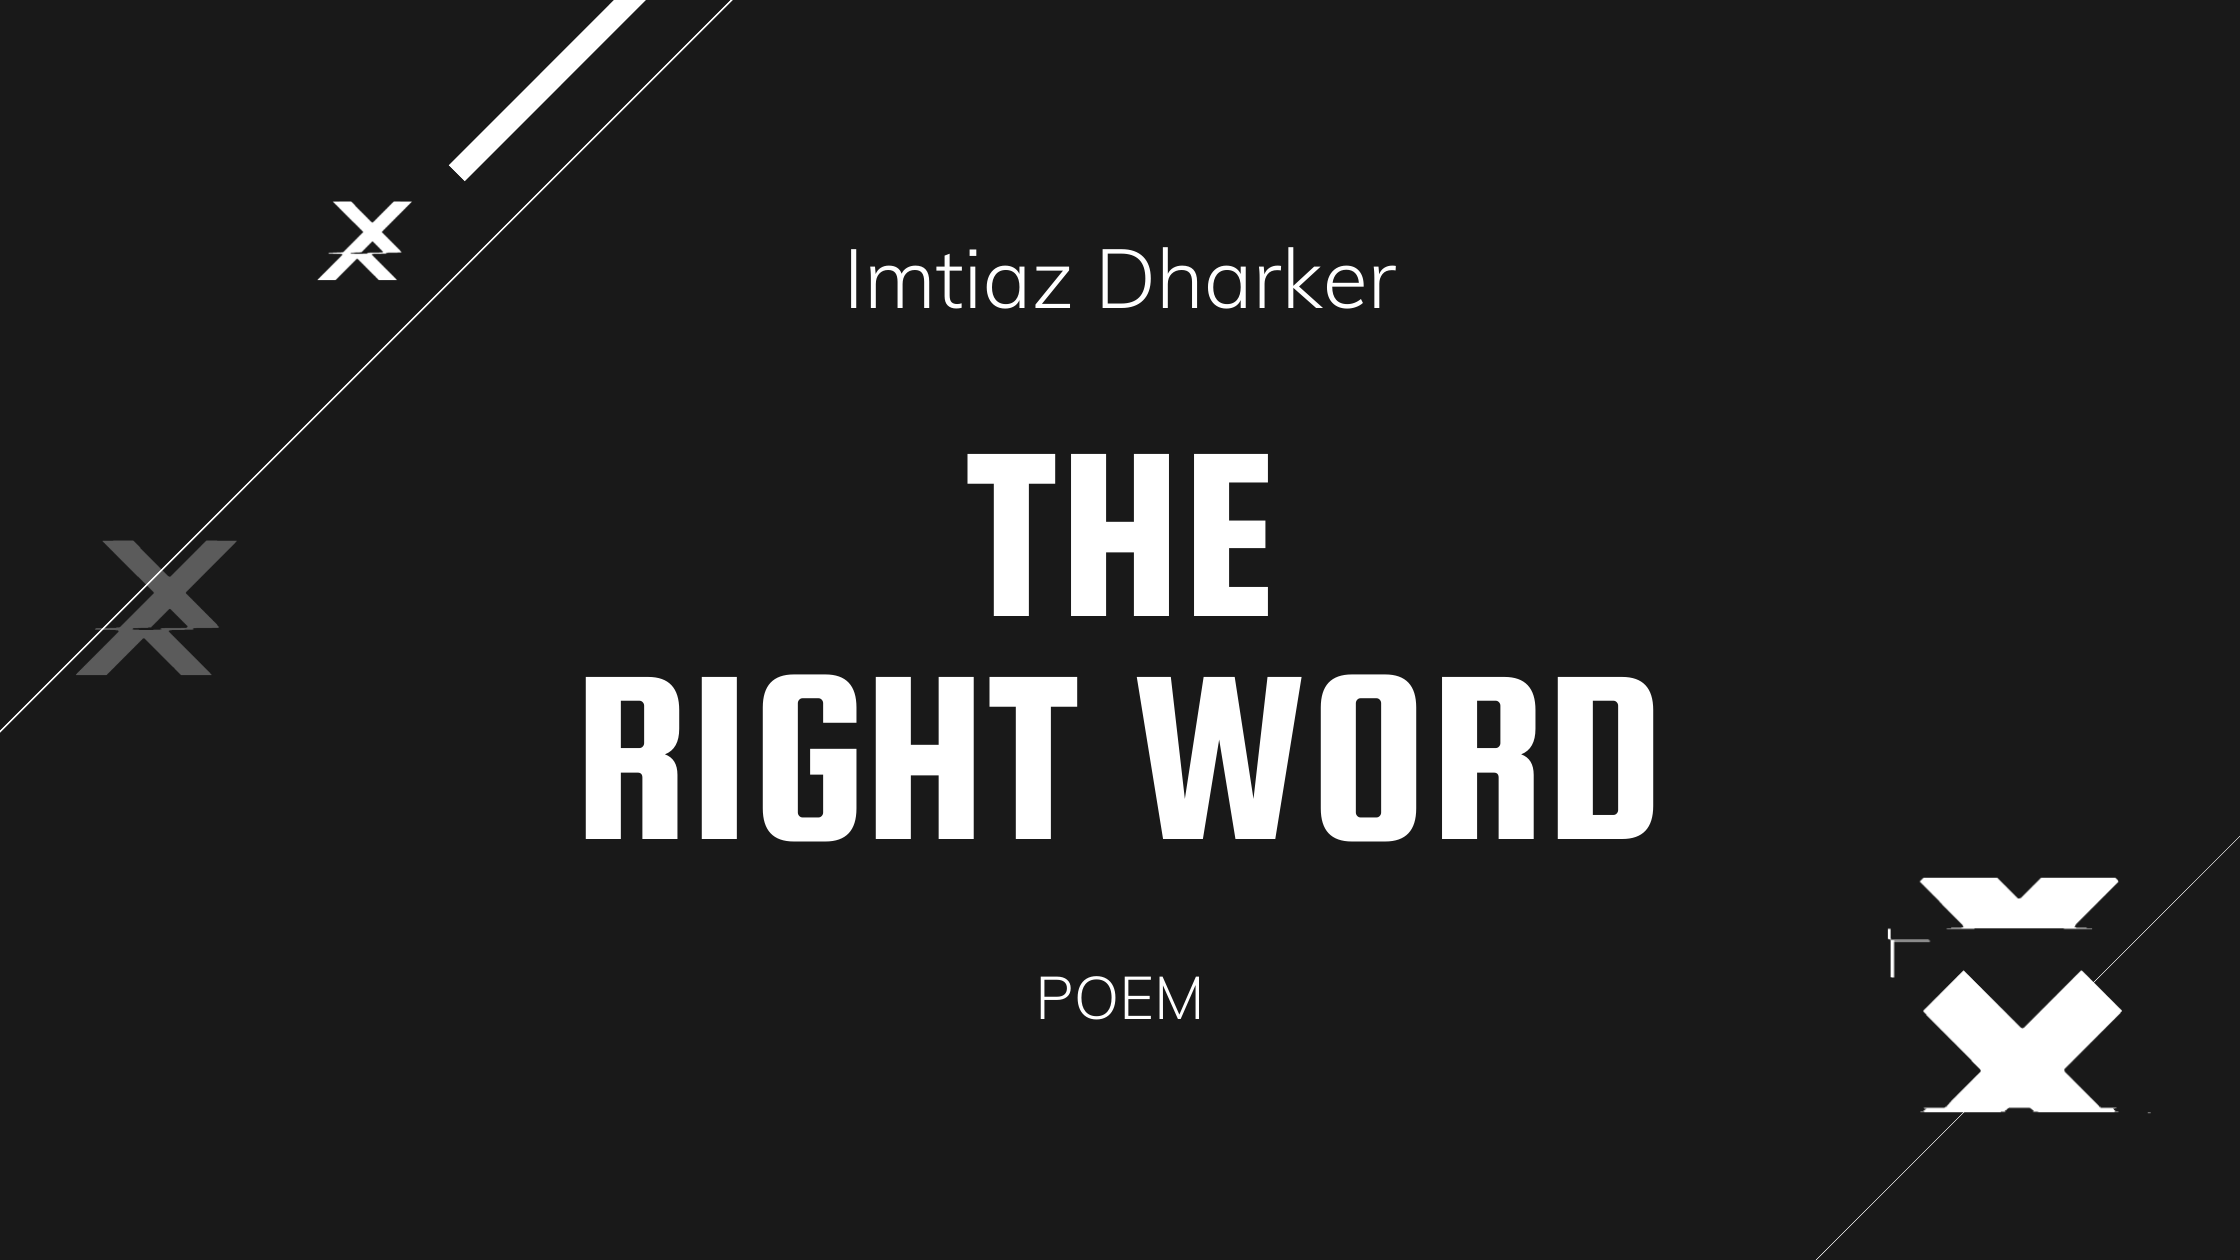 THE RIGHT WORD by Imtiaz Dharker Poem